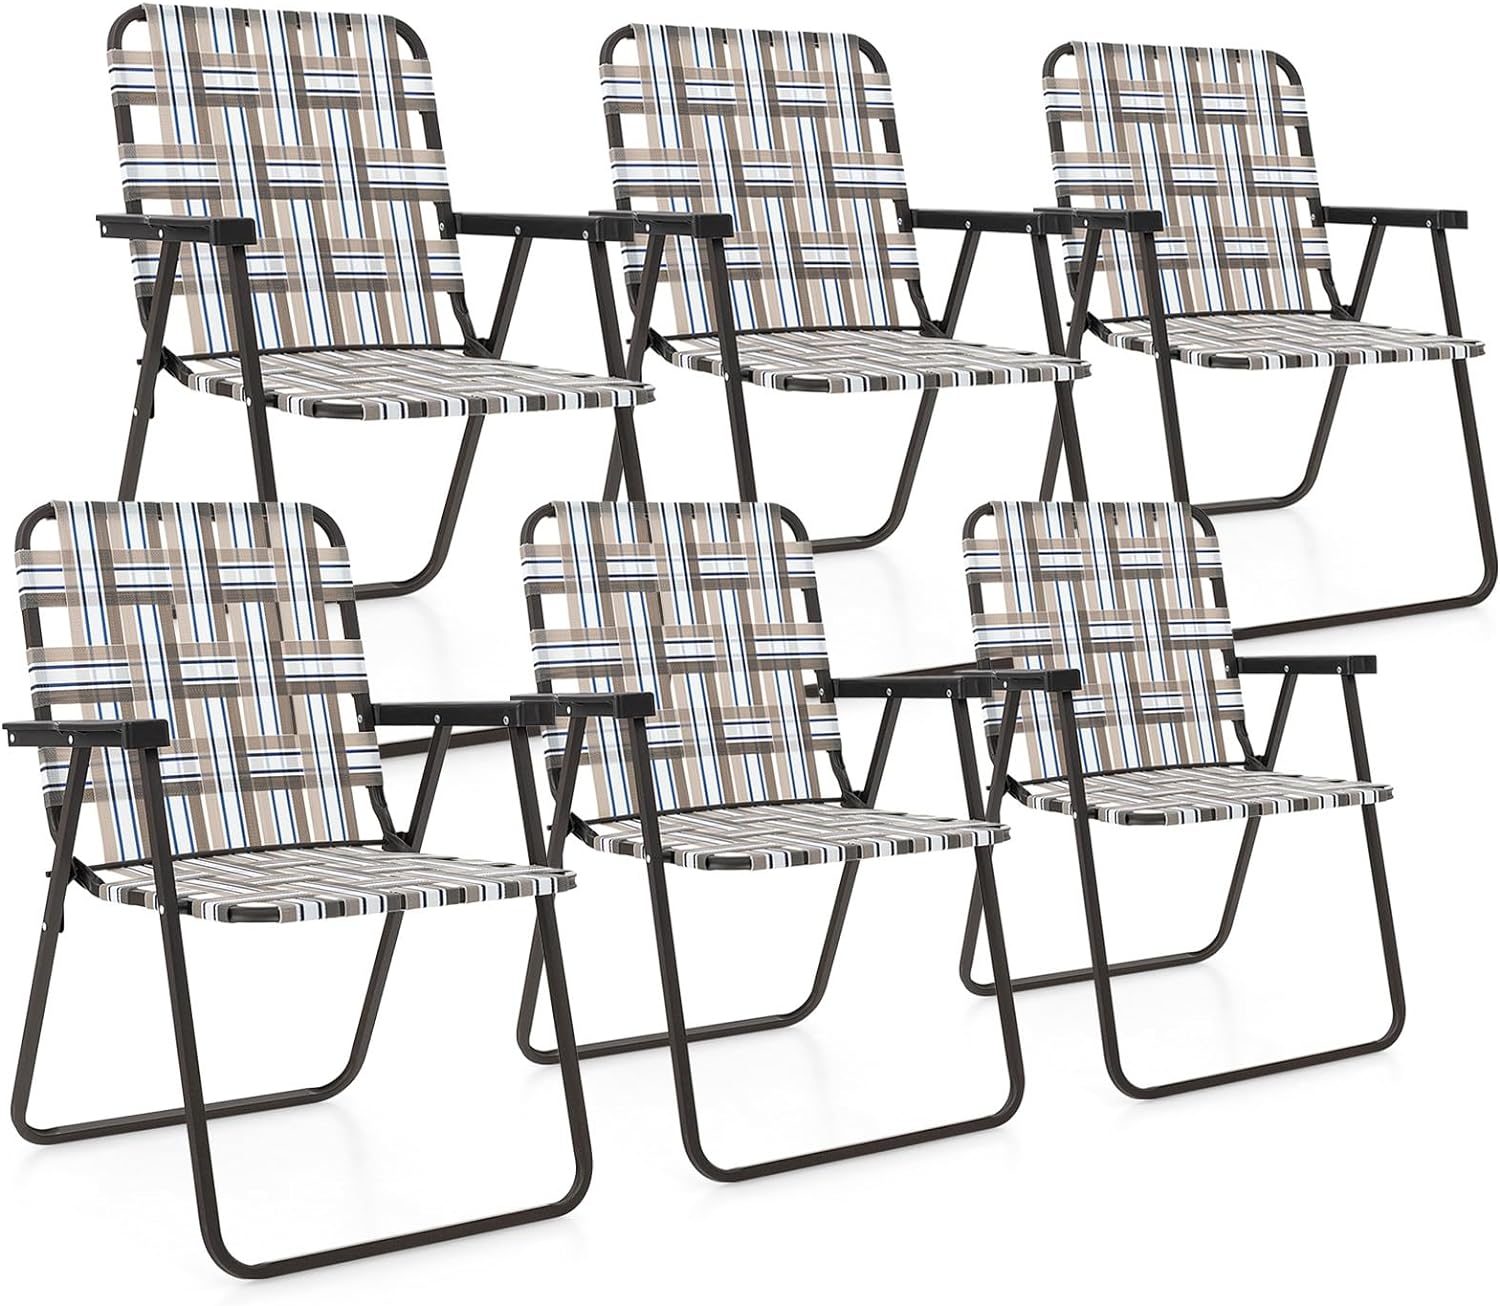 Giantex Folding Lawn Chairs Set of 6 Outdoor Portable Beach Chair W/Stable Steel Frame